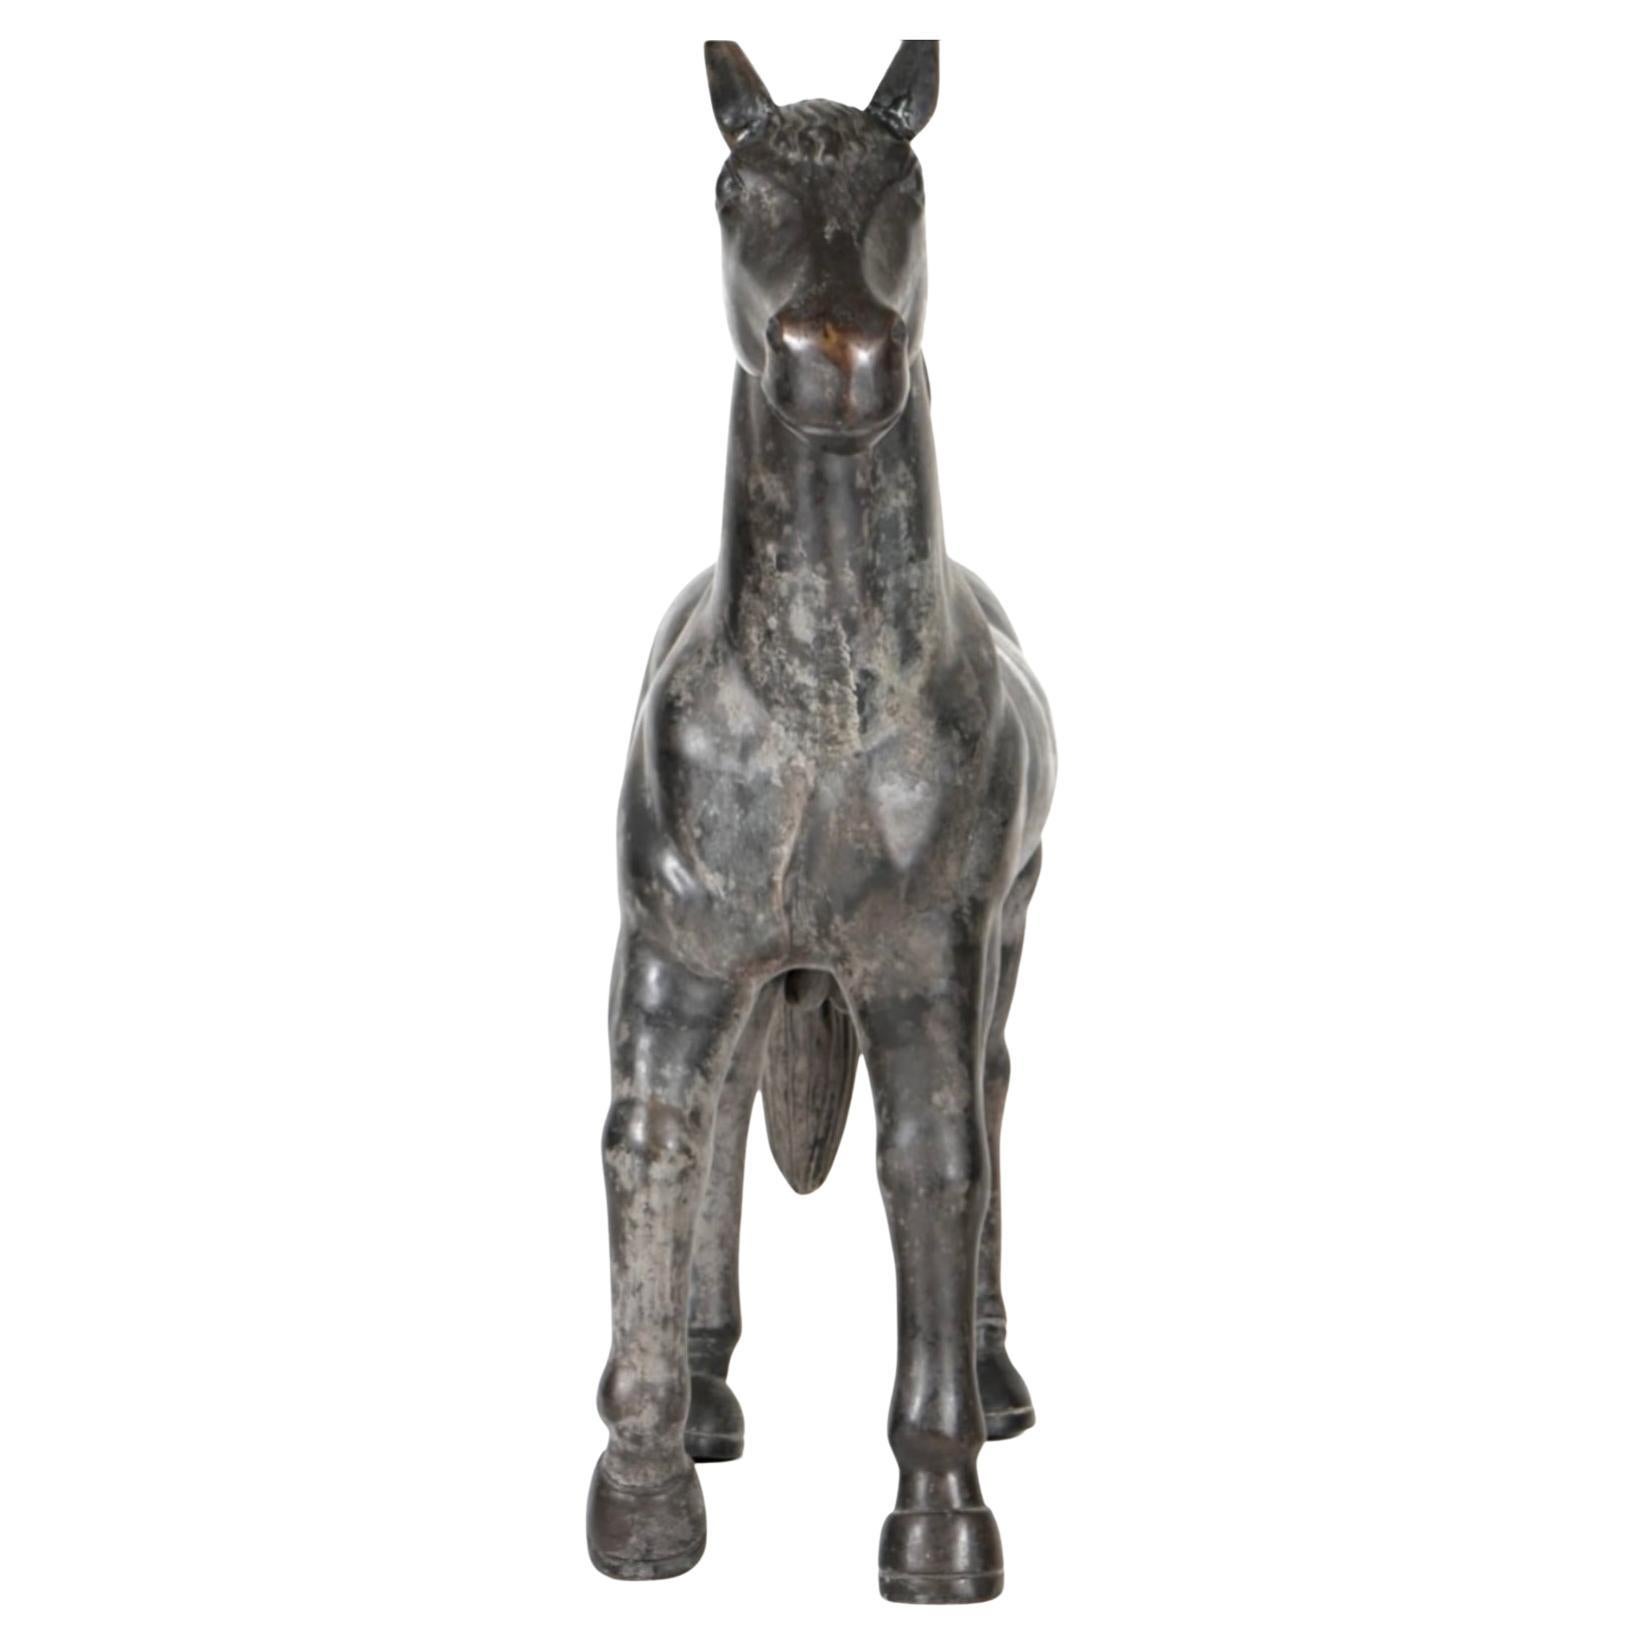 This is a large and patinated bronze figure of a horse. It is almost life-like and has great pony details from head to tail. No visible signature.